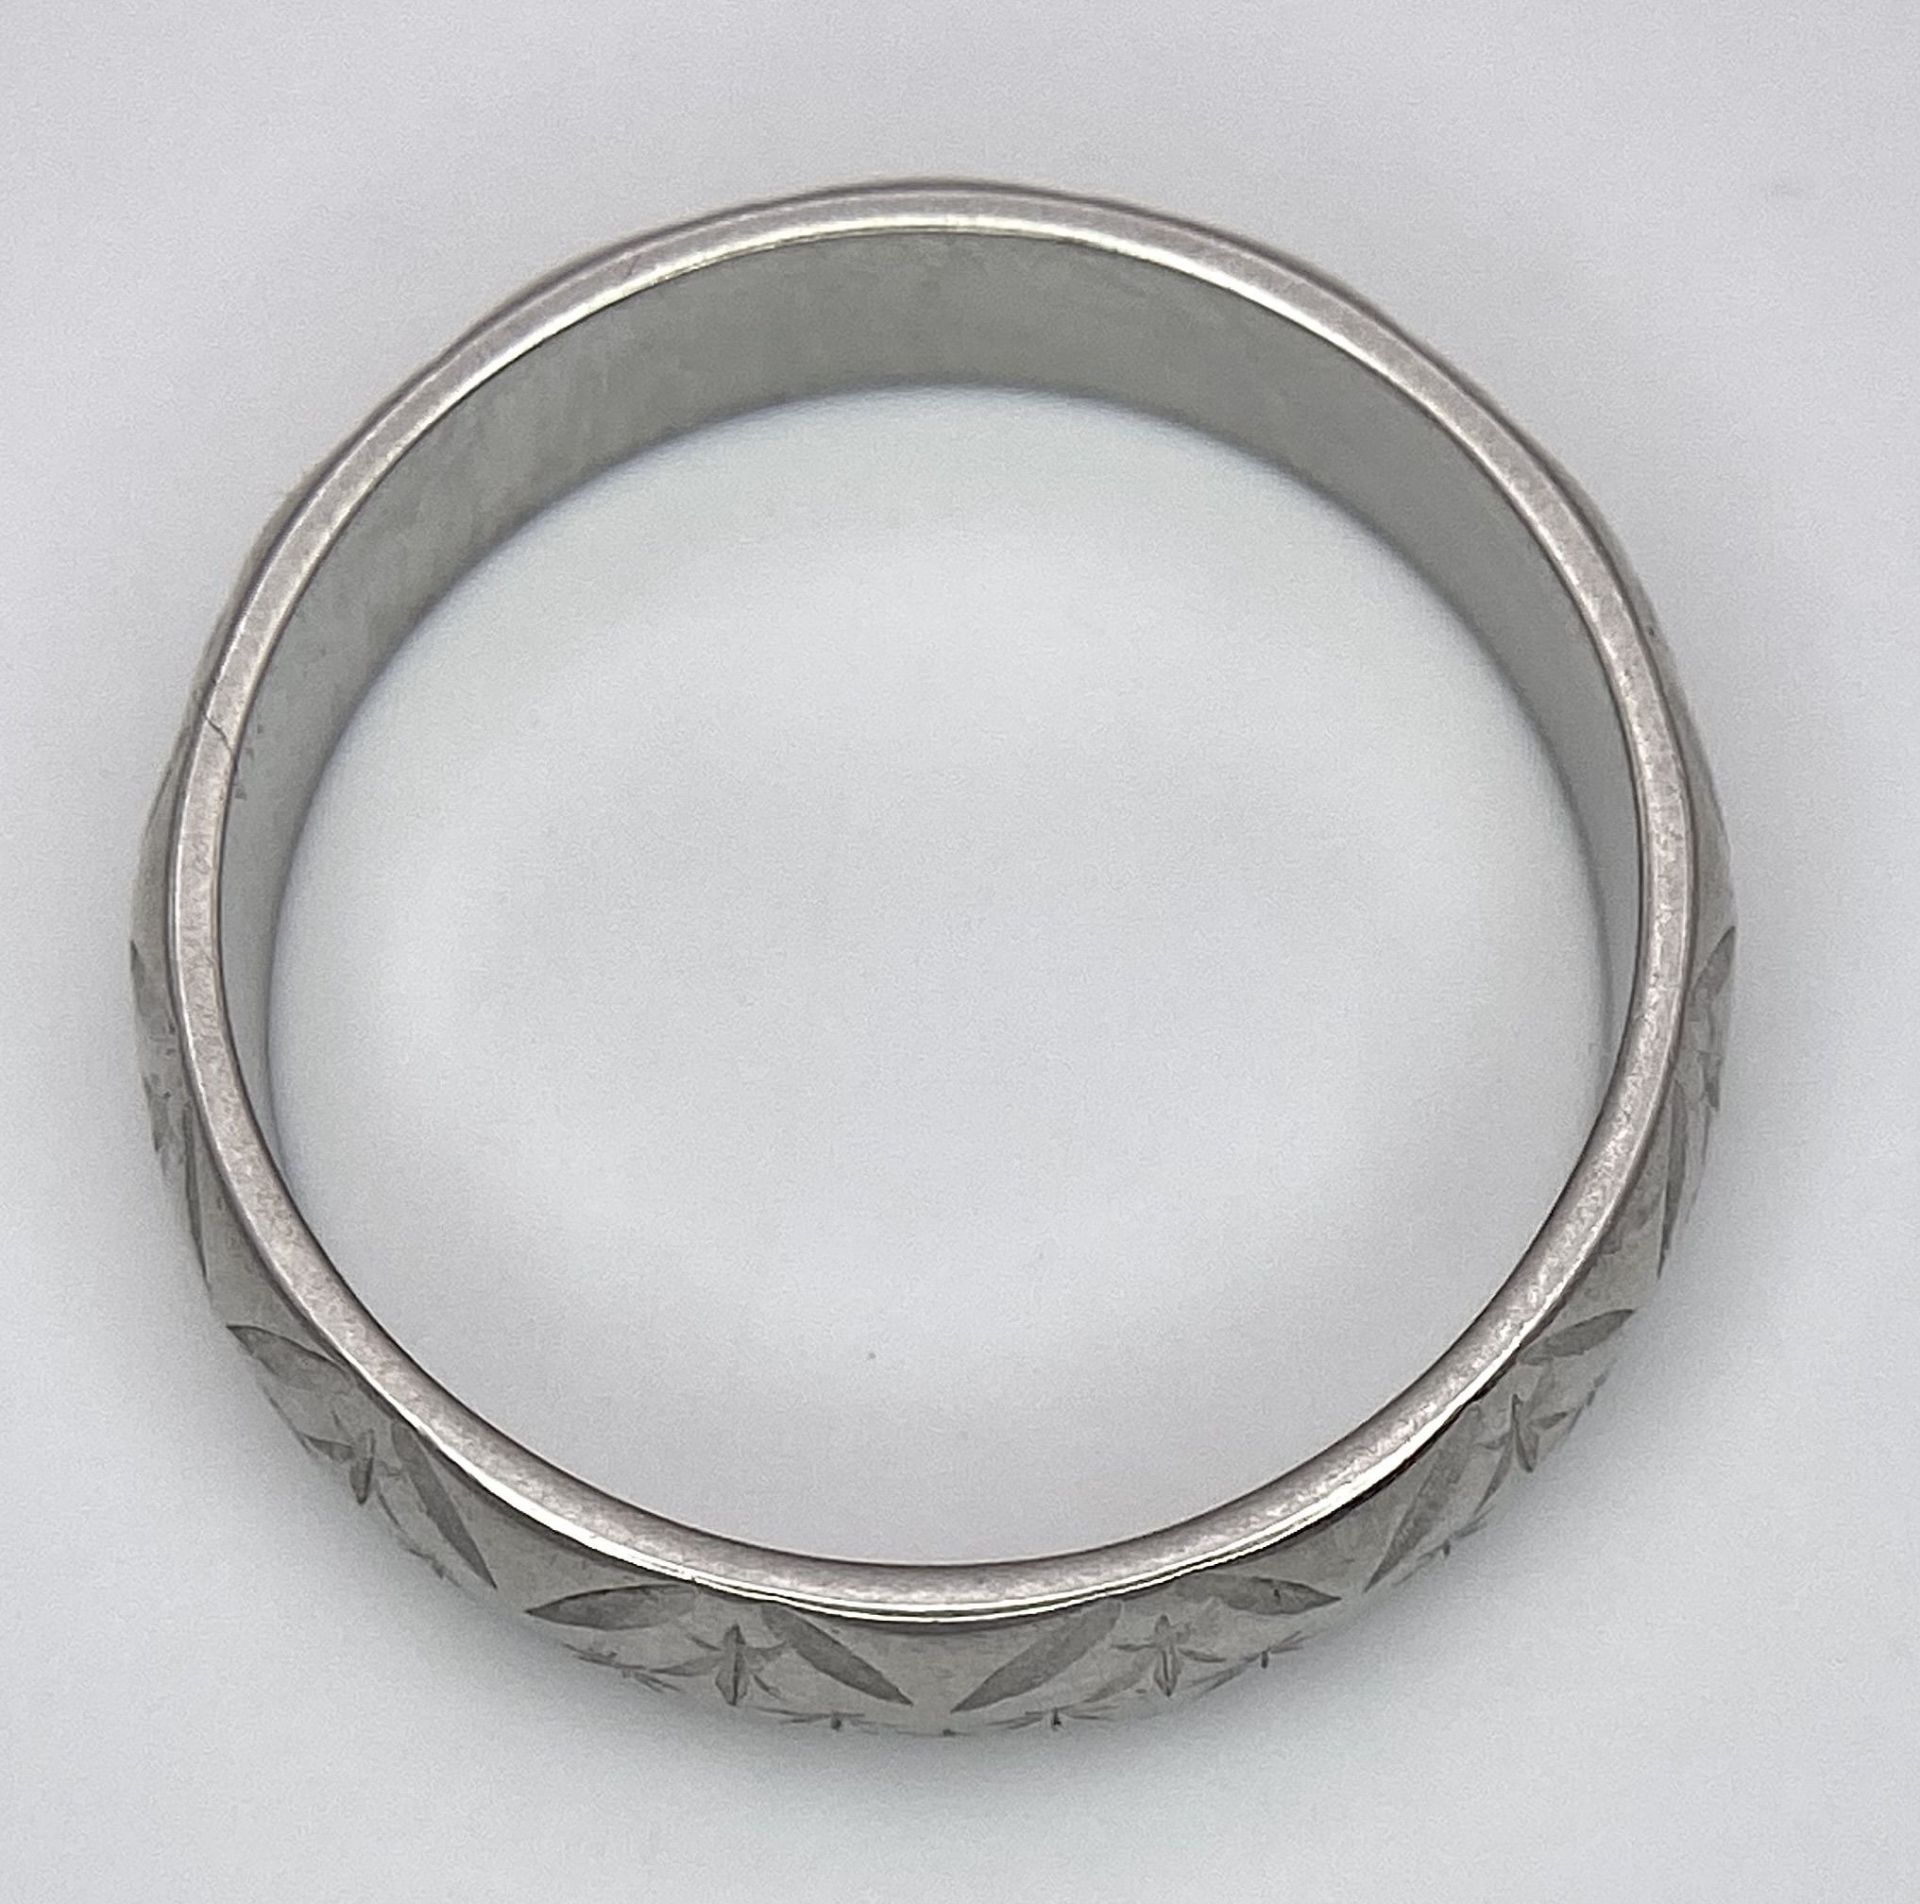 A Vintage Platinum Band Ring with Geometric Decorative Pattern. 5mm width. Size P. 7.5g - Image 5 of 6